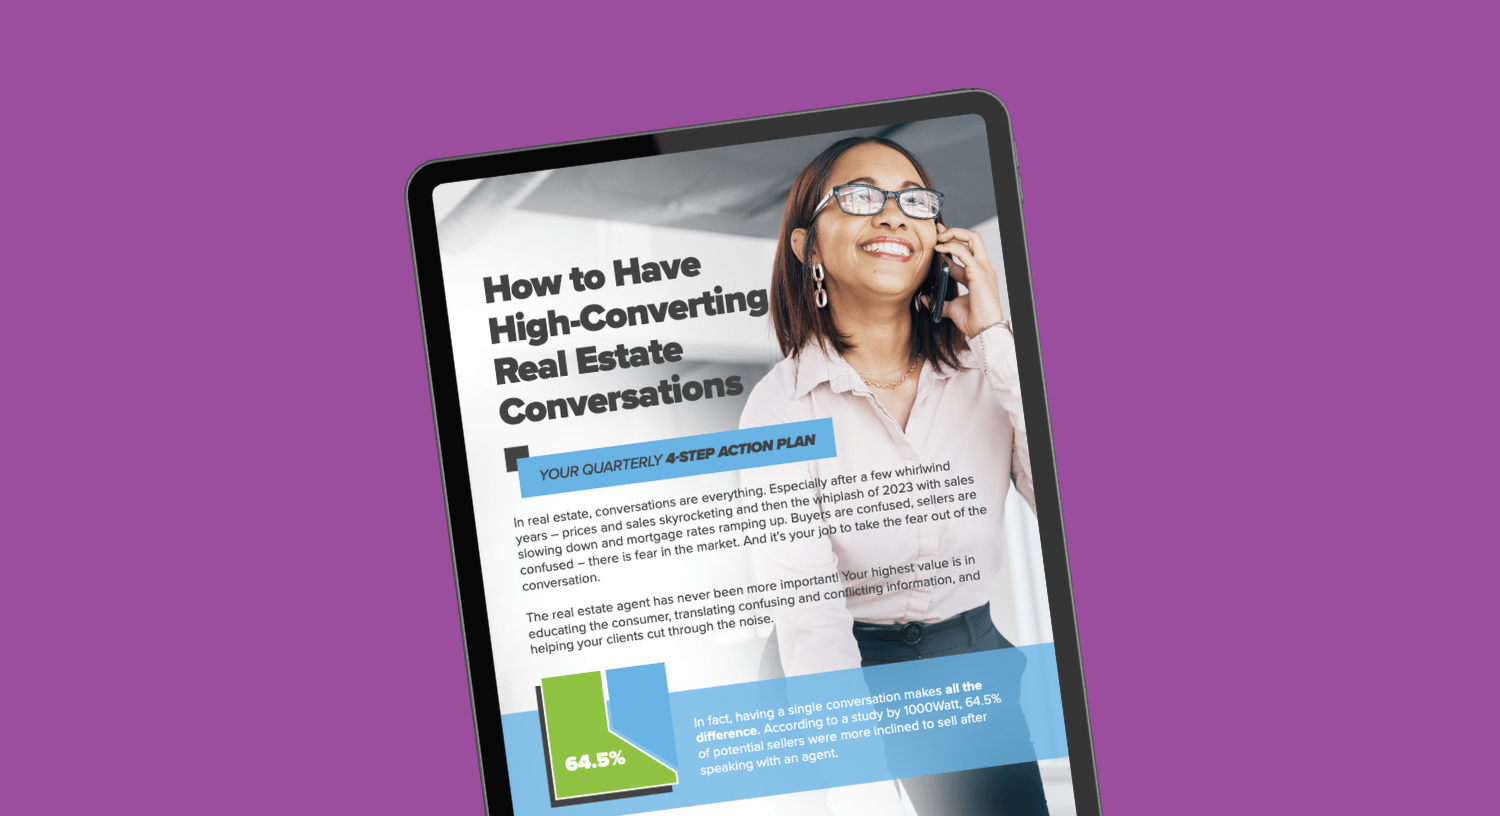 How to Have High-Converting Real Estate Conversations: Your Quarterly 4-Step Action Plan